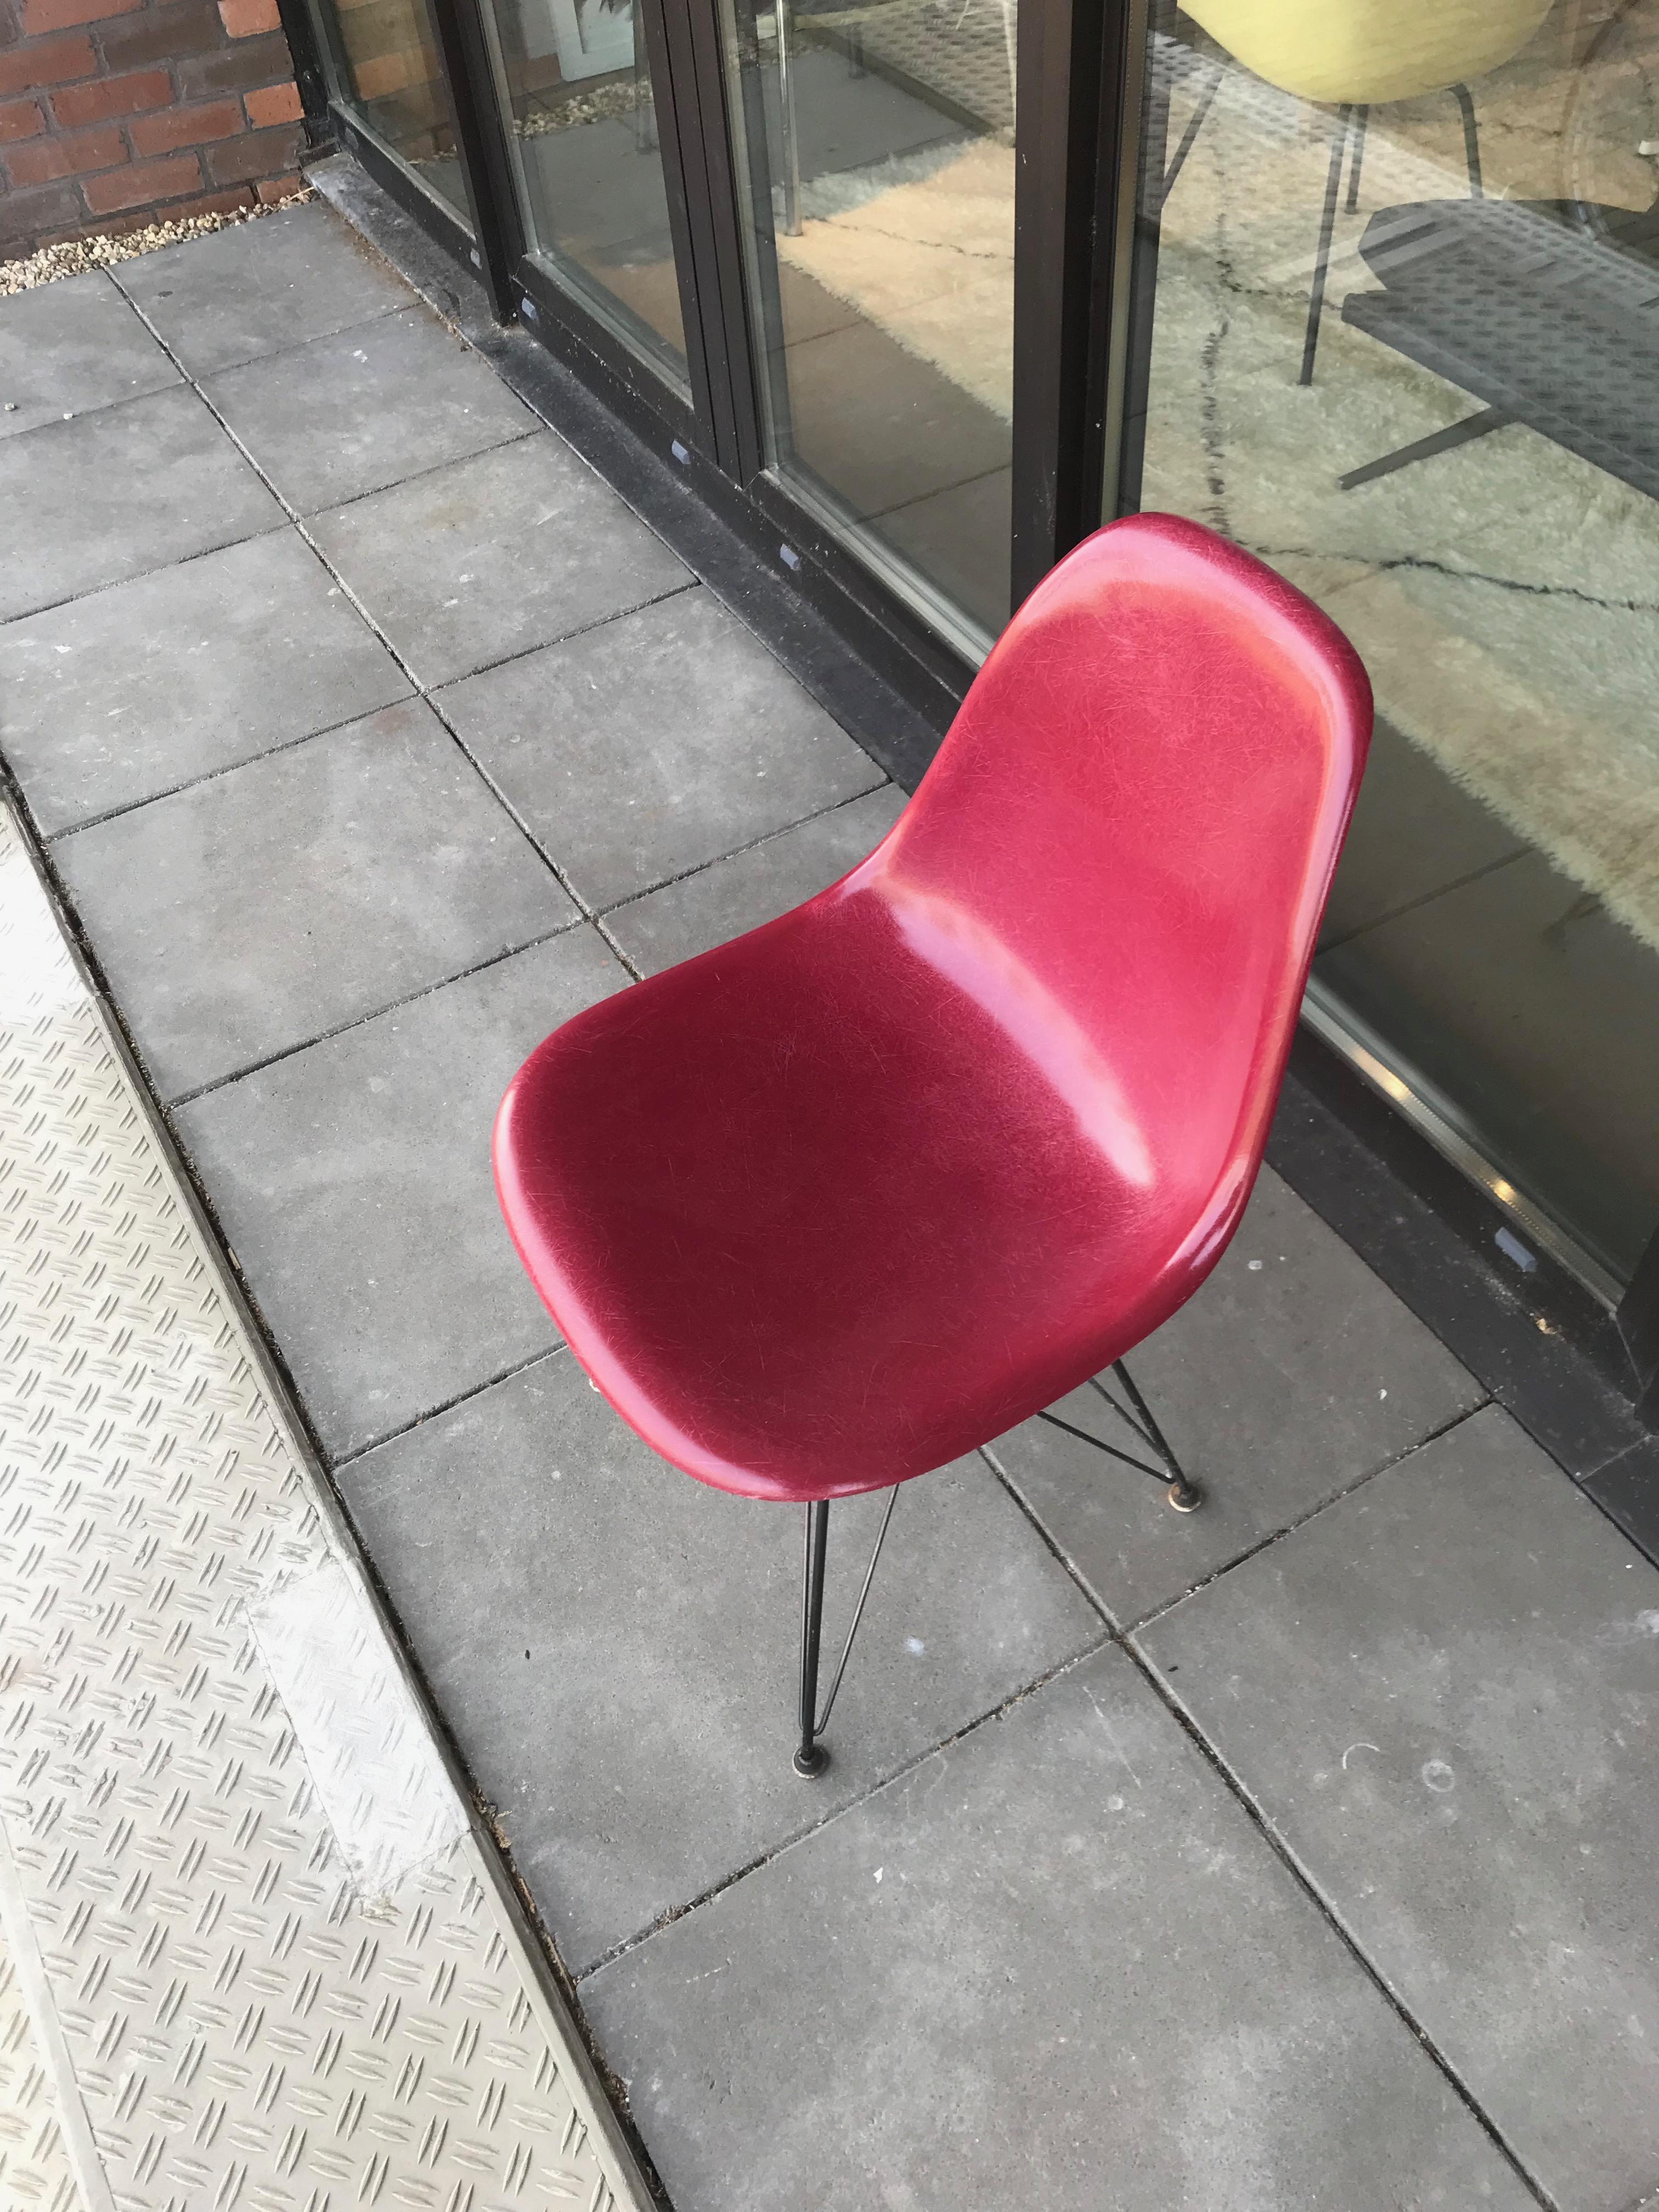 For Claudius...
Beautiful iconic DSR chair in rare Magenta color. The fiberglass shell is in very good vintage condition with only slight traces of use. Original black enamebeled steel base also in very good condition. The chair is signed with